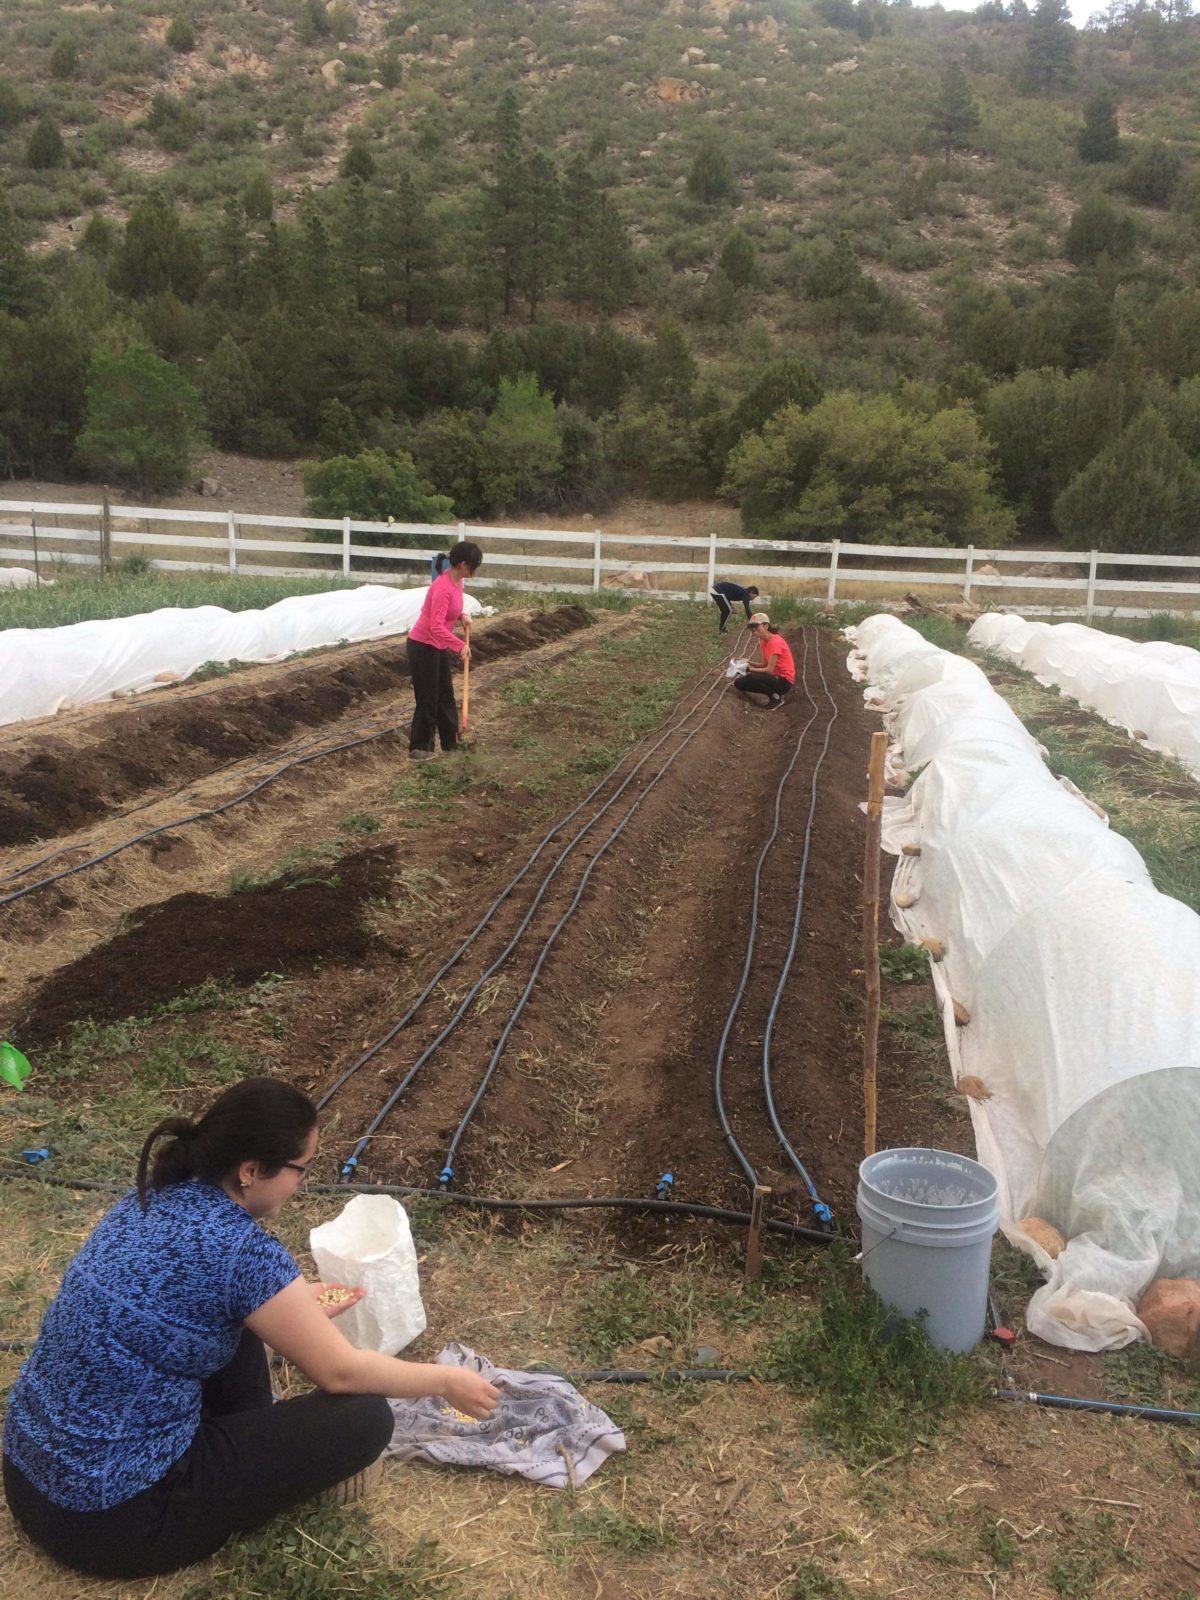 Students return to campus to work on farm